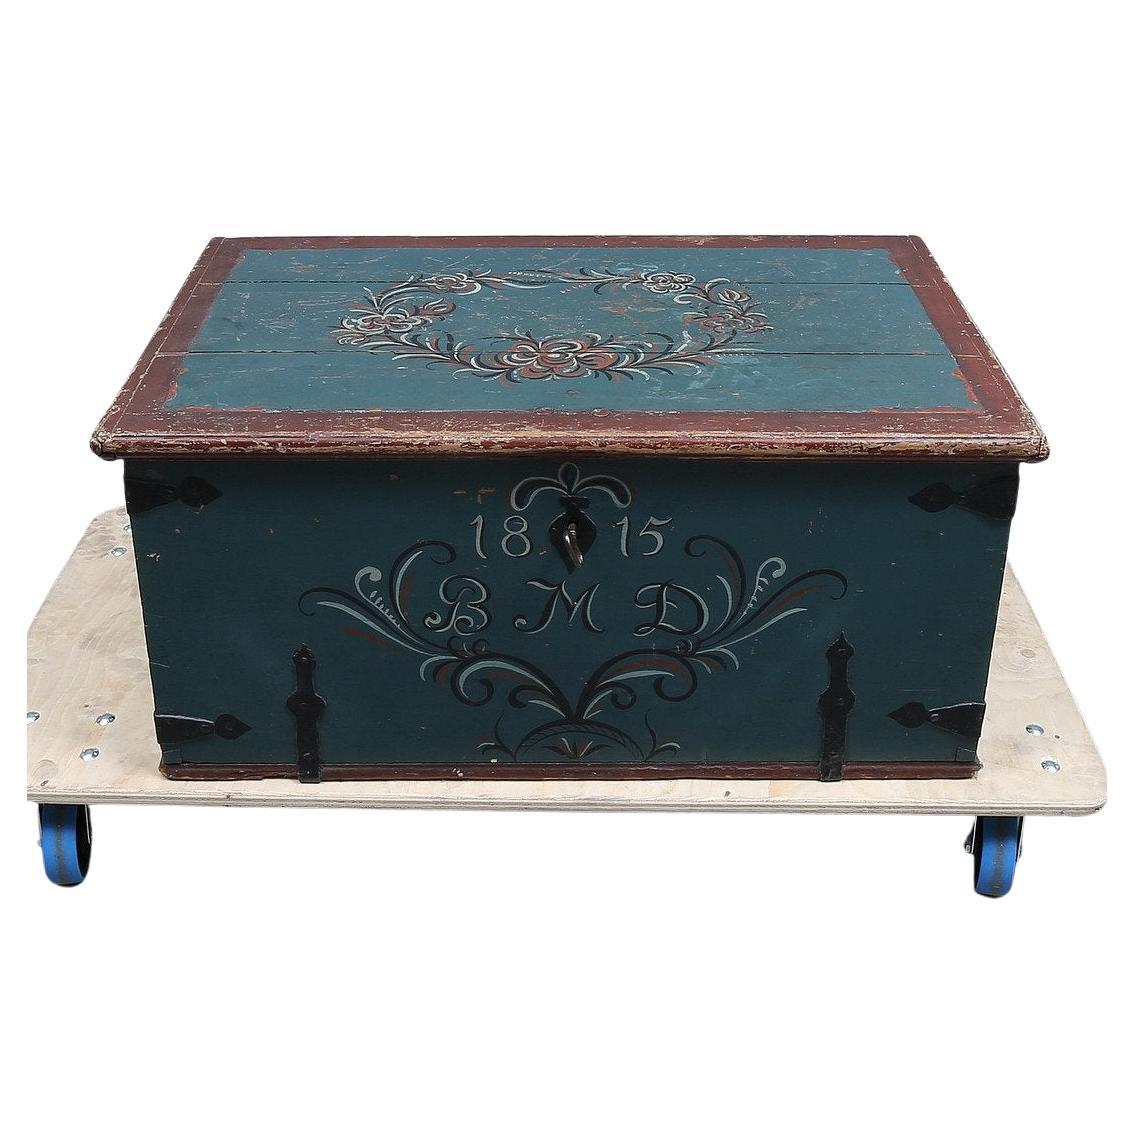 Hand-Painted Folklore Trunk, ca. 1815